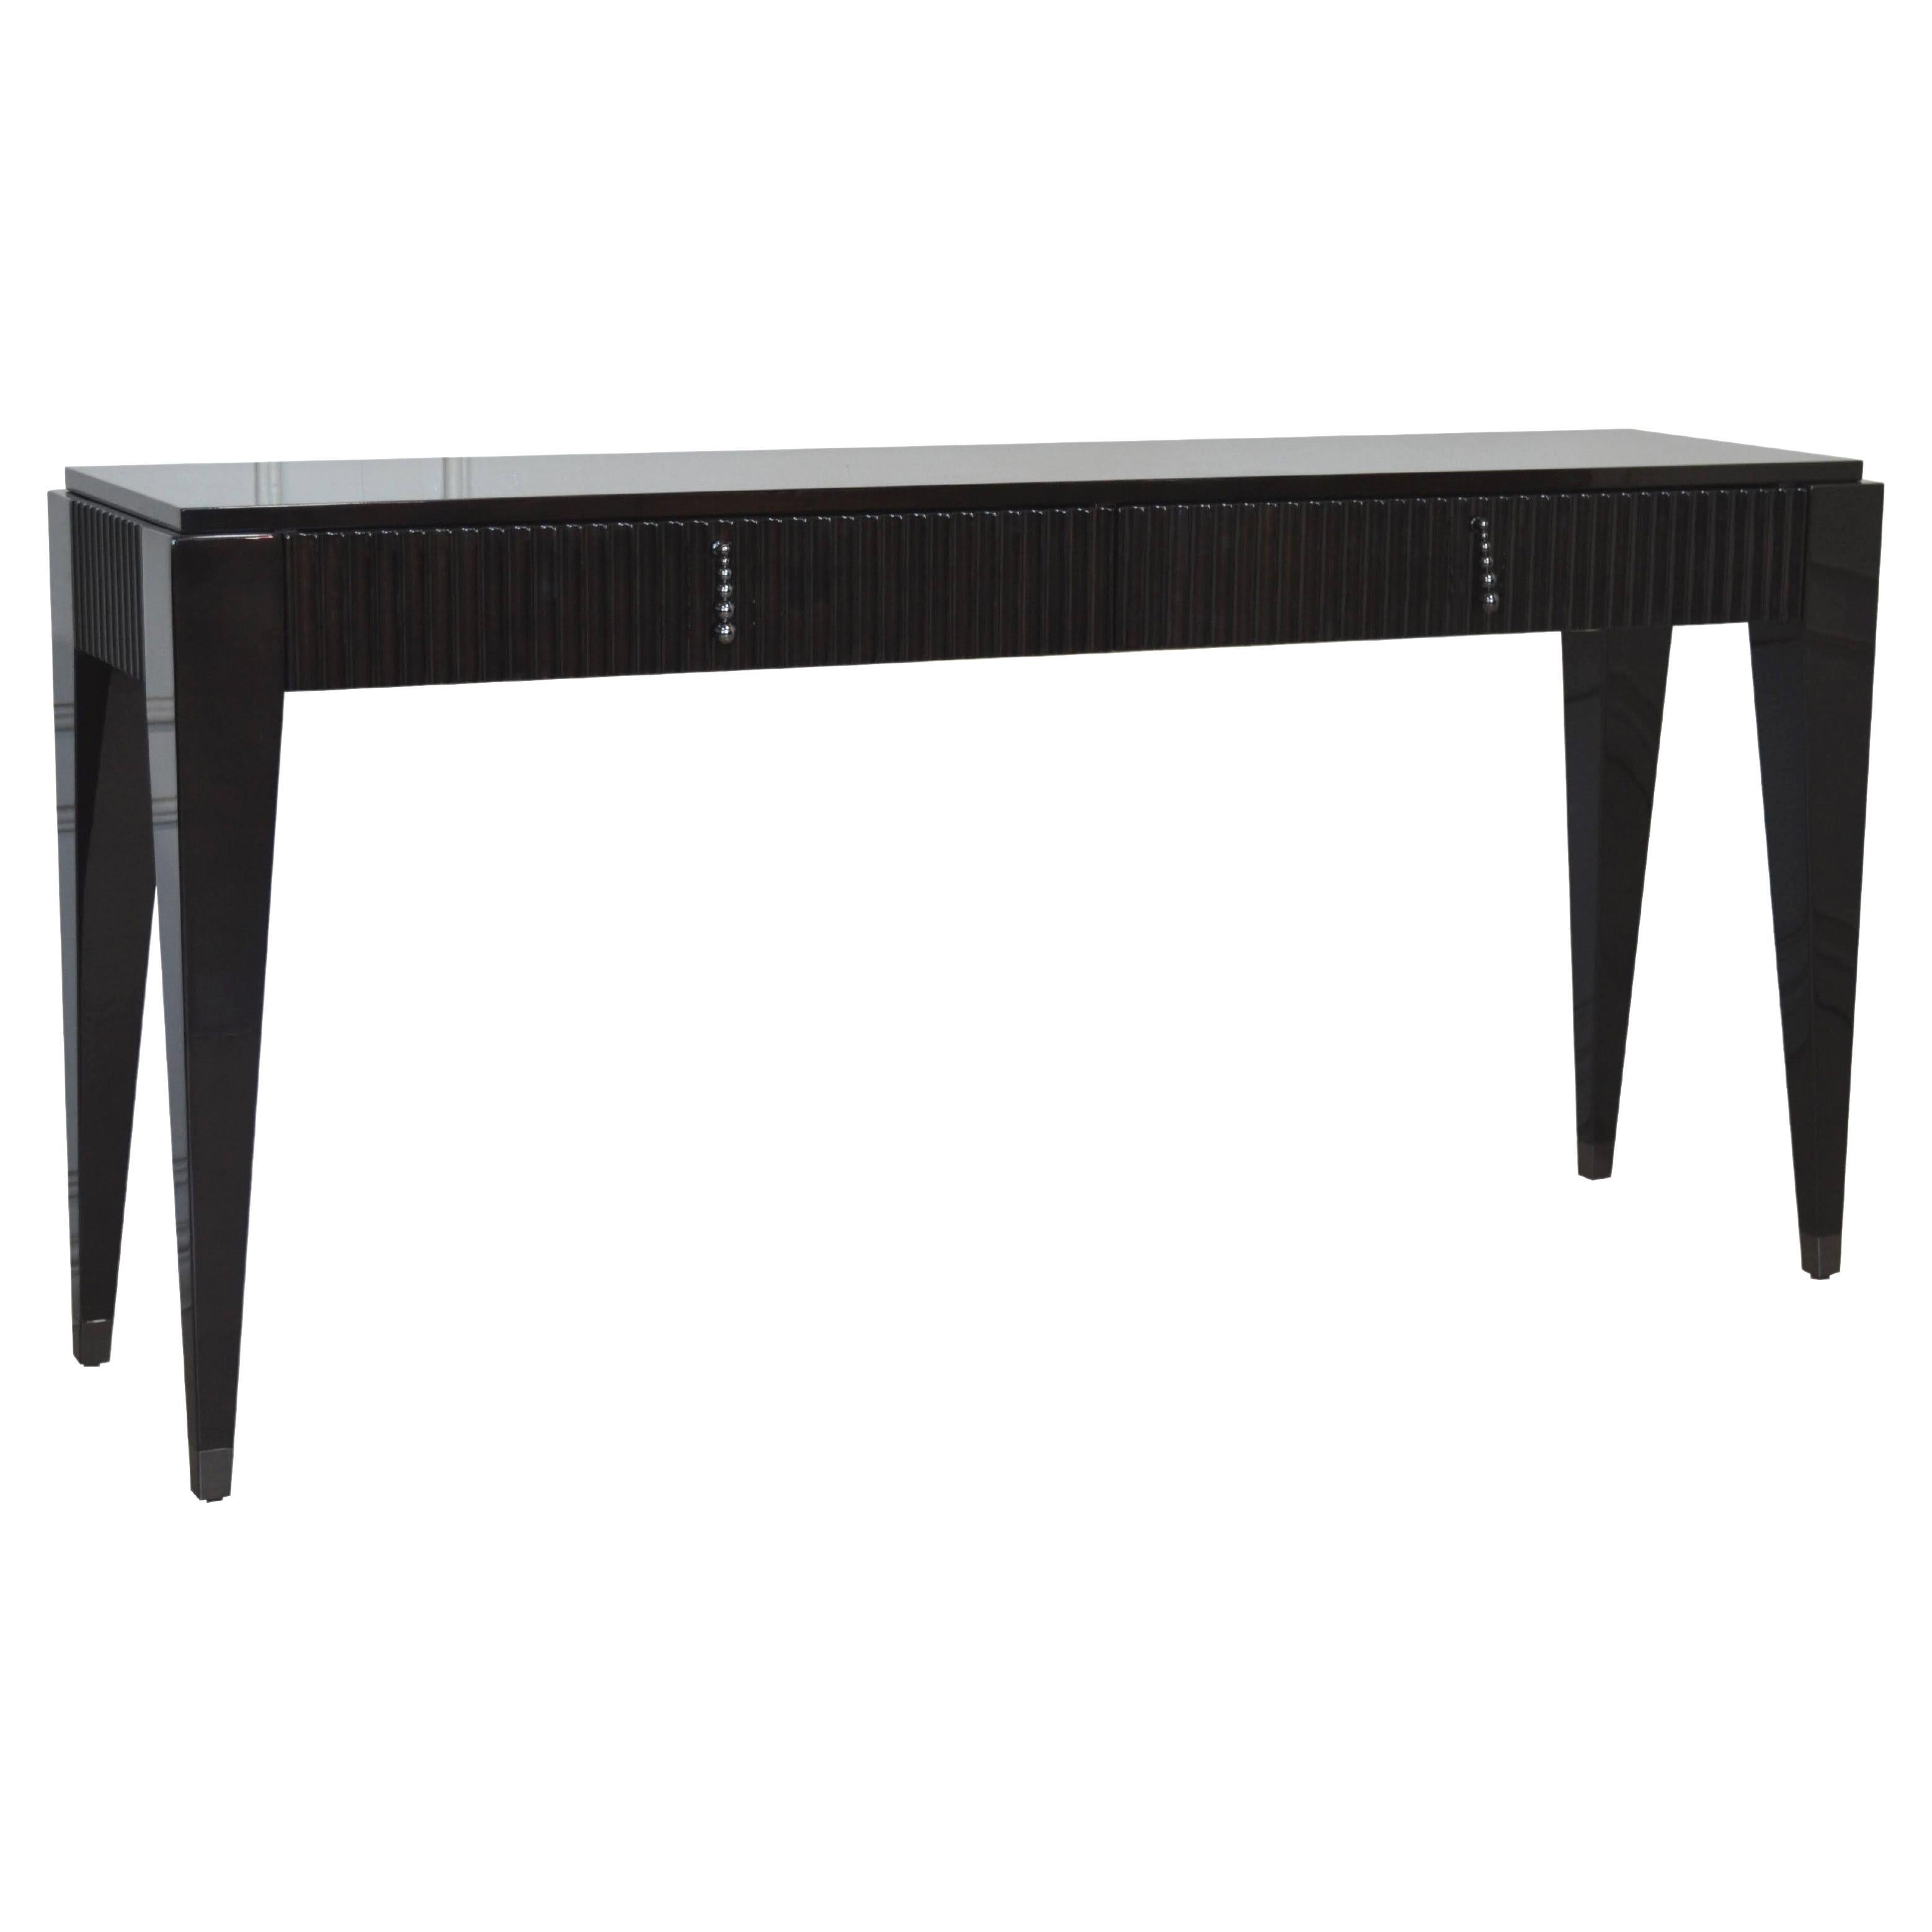 Italian Contemporary Ebony High-Gloss Console / Writing Desk with Two Drawers For Sale